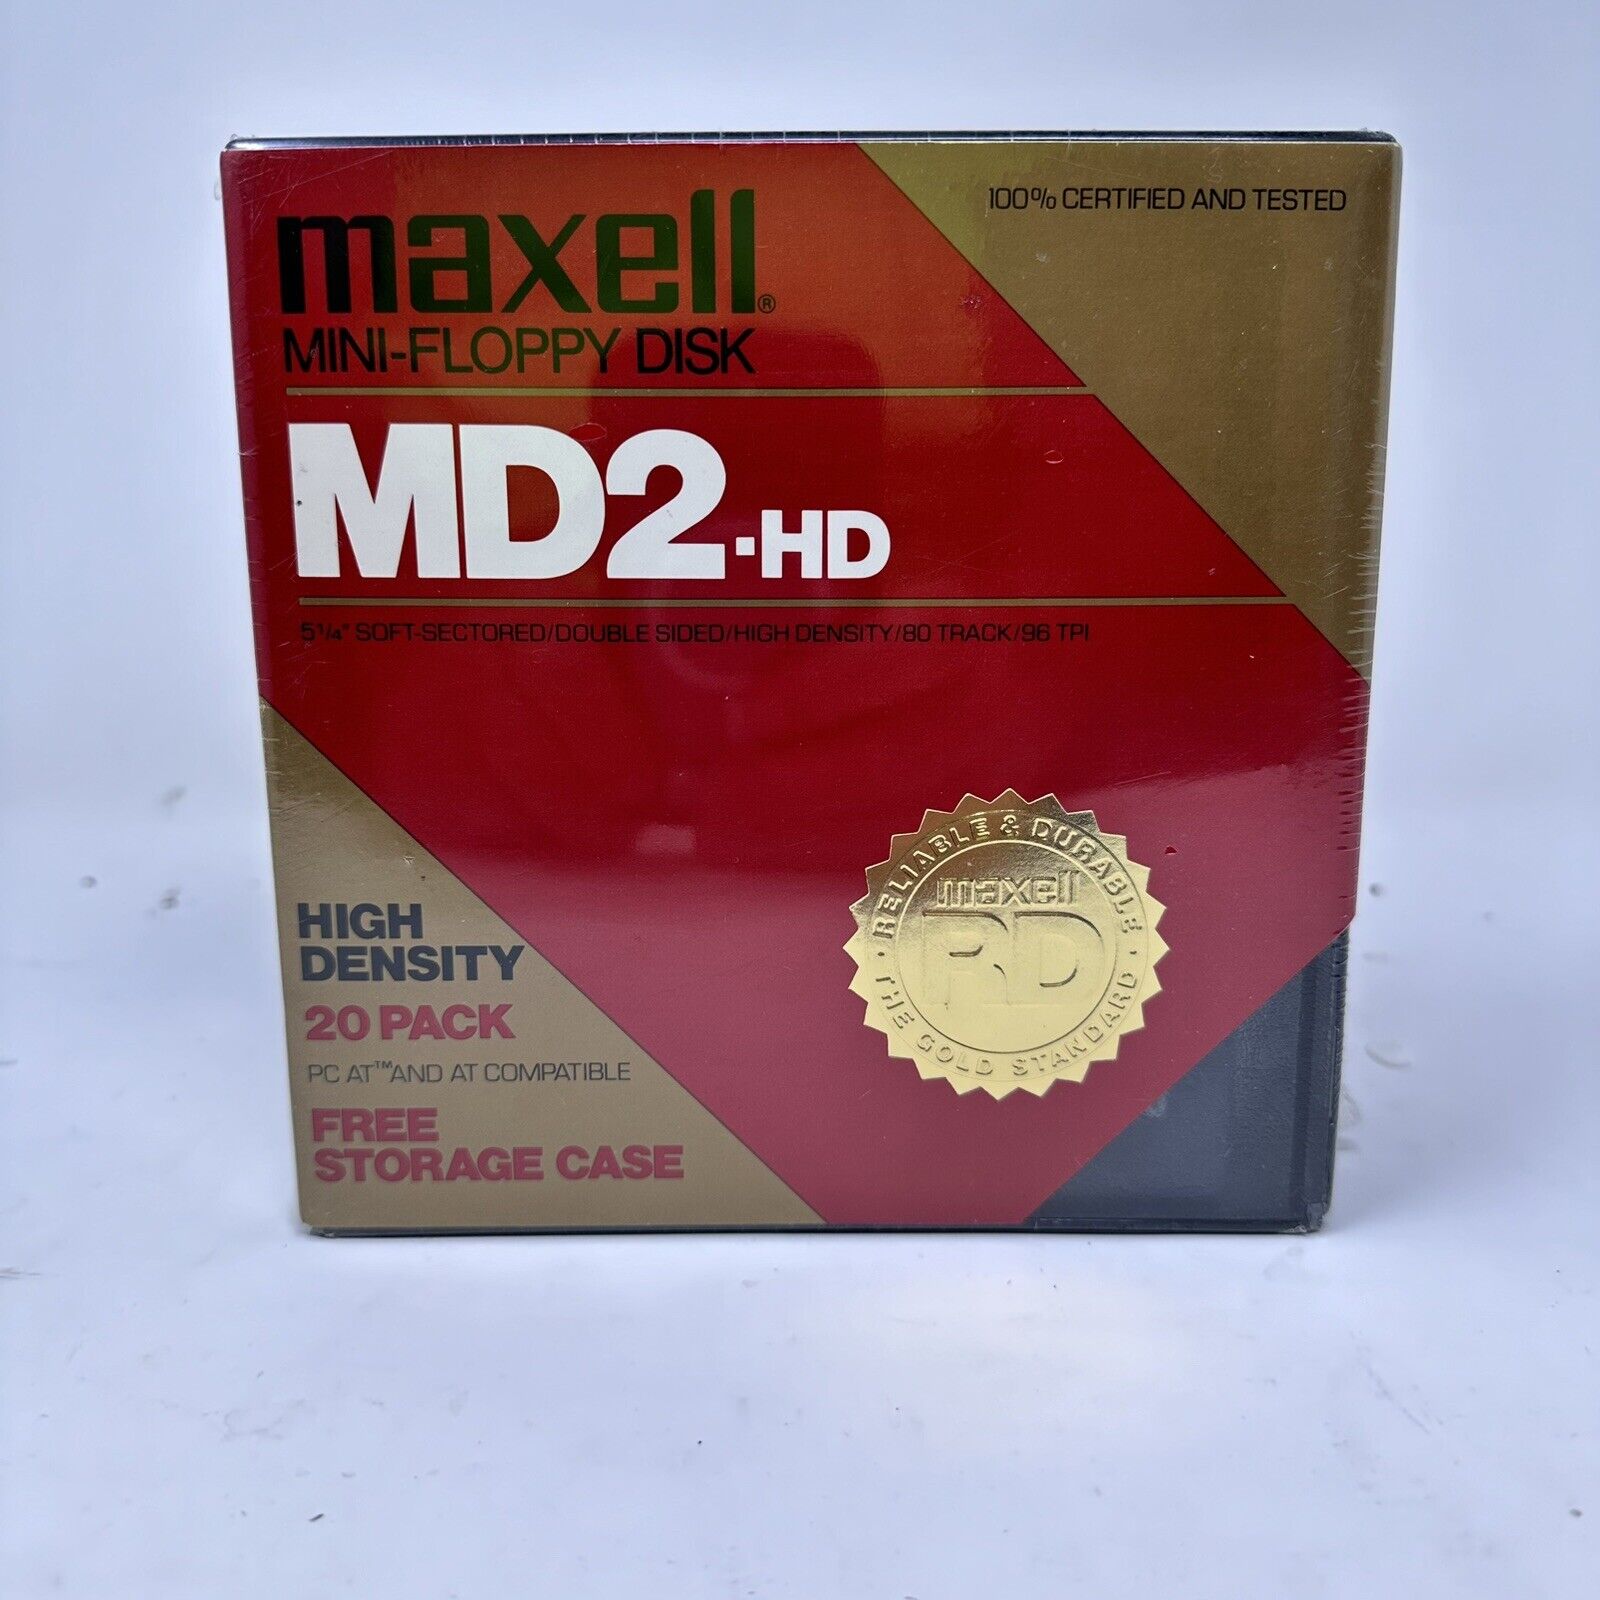 NEW Maxell MD2-HD Double Sided Double Density 5.25